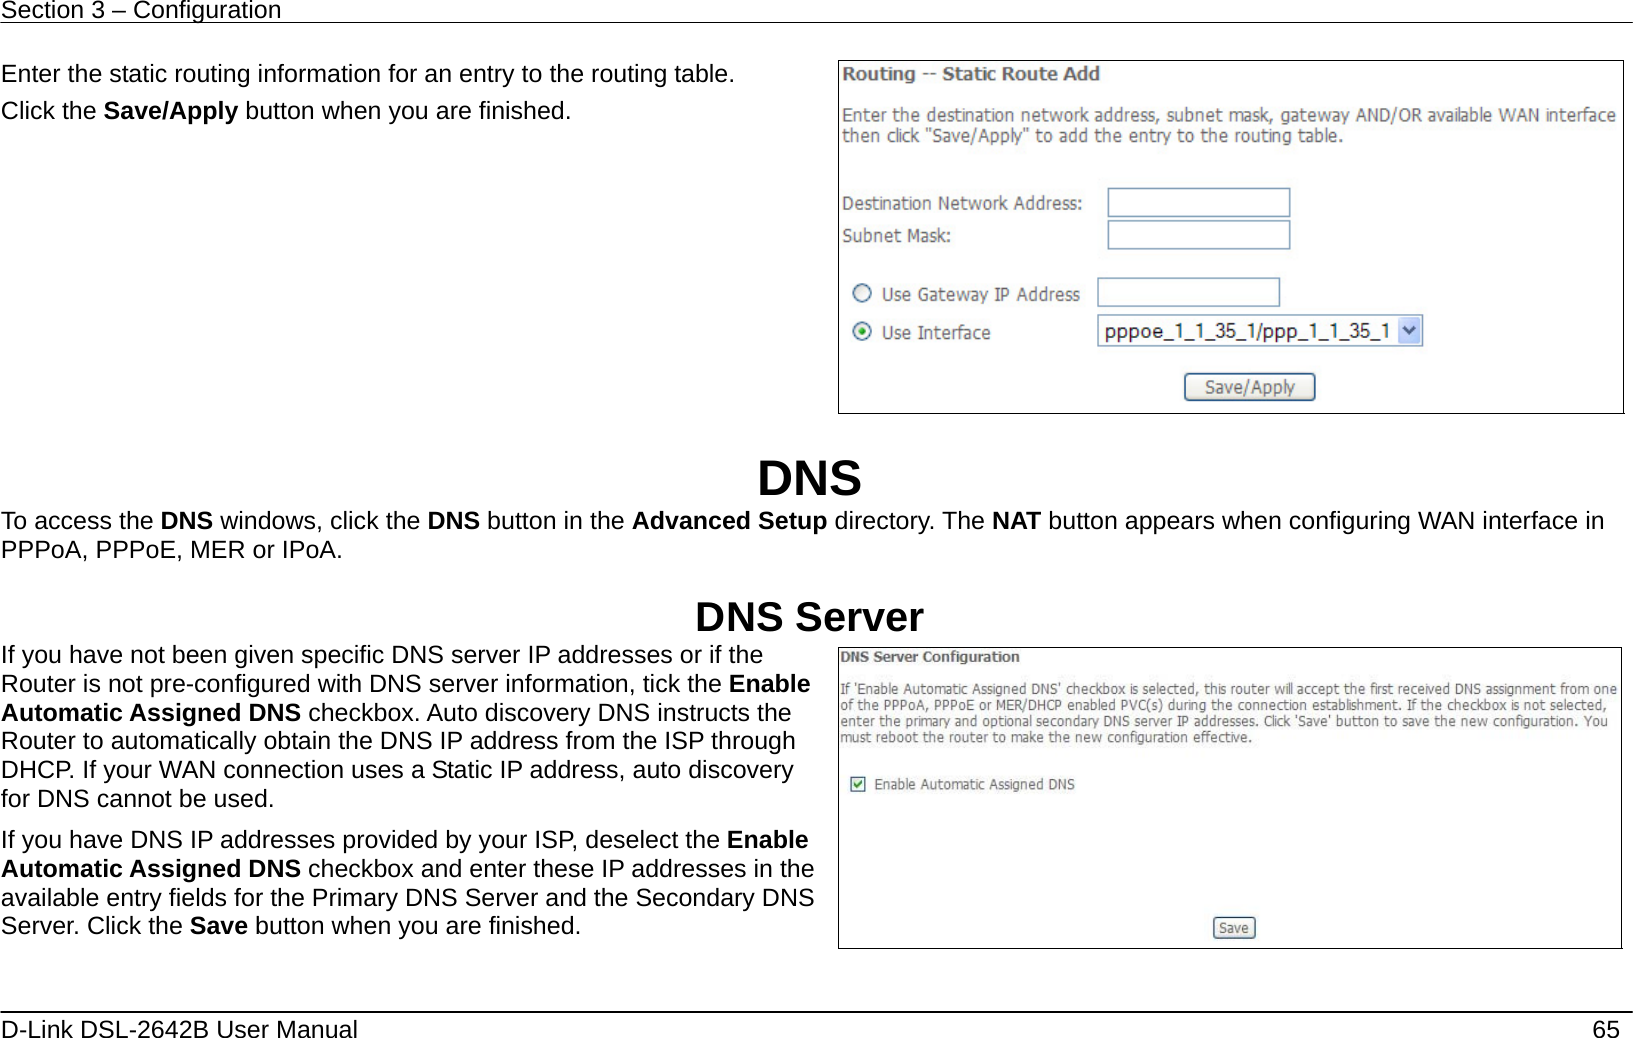 Section 3 – Configuration   D-Link DSL-2642B User Manual    65 Enter the static routing information for an entry to the routing table. Click the Save/Apply button when you are finished.    DNS To access the DNS windows, click the DNS button in the Advanced Setup directory. The NAT button appears when configuring WAN interface in PPPoA, PPPoE, MER or IPoA.  DNS Server If you have not been given specific DNS server IP addresses or if the Router is not pre-configured with DNS server information, tick the Enable Automatic Assigned DNS checkbox. Auto discovery DNS instructs the Router to automatically obtain the DNS IP address from the ISP through DHCP. If your WAN connection uses a Static IP address, auto discovery for DNS cannot be used. If you have DNS IP addresses provided by your ISP, deselect the Enable Automatic Assigned DNS checkbox and enter these IP addresses in the available entry fields for the Primary DNS Server and the Secondary DNS Server. Click the Save button when you are finished.    